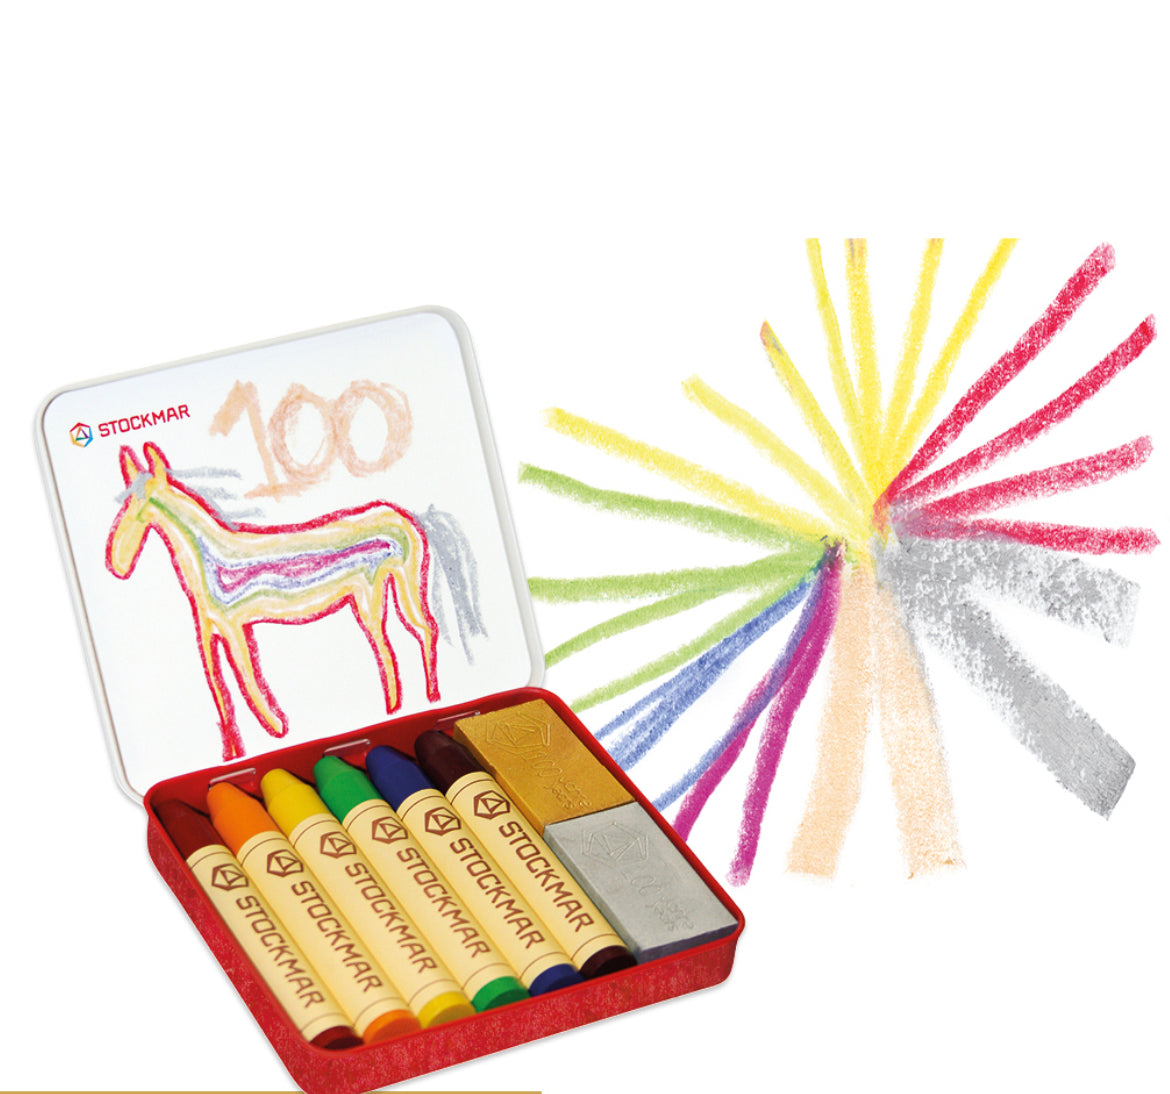 Stockmar Rainbow Edition Stick and Block Crayons - 8 Assorted Wax Crayons - Alder & Alouette